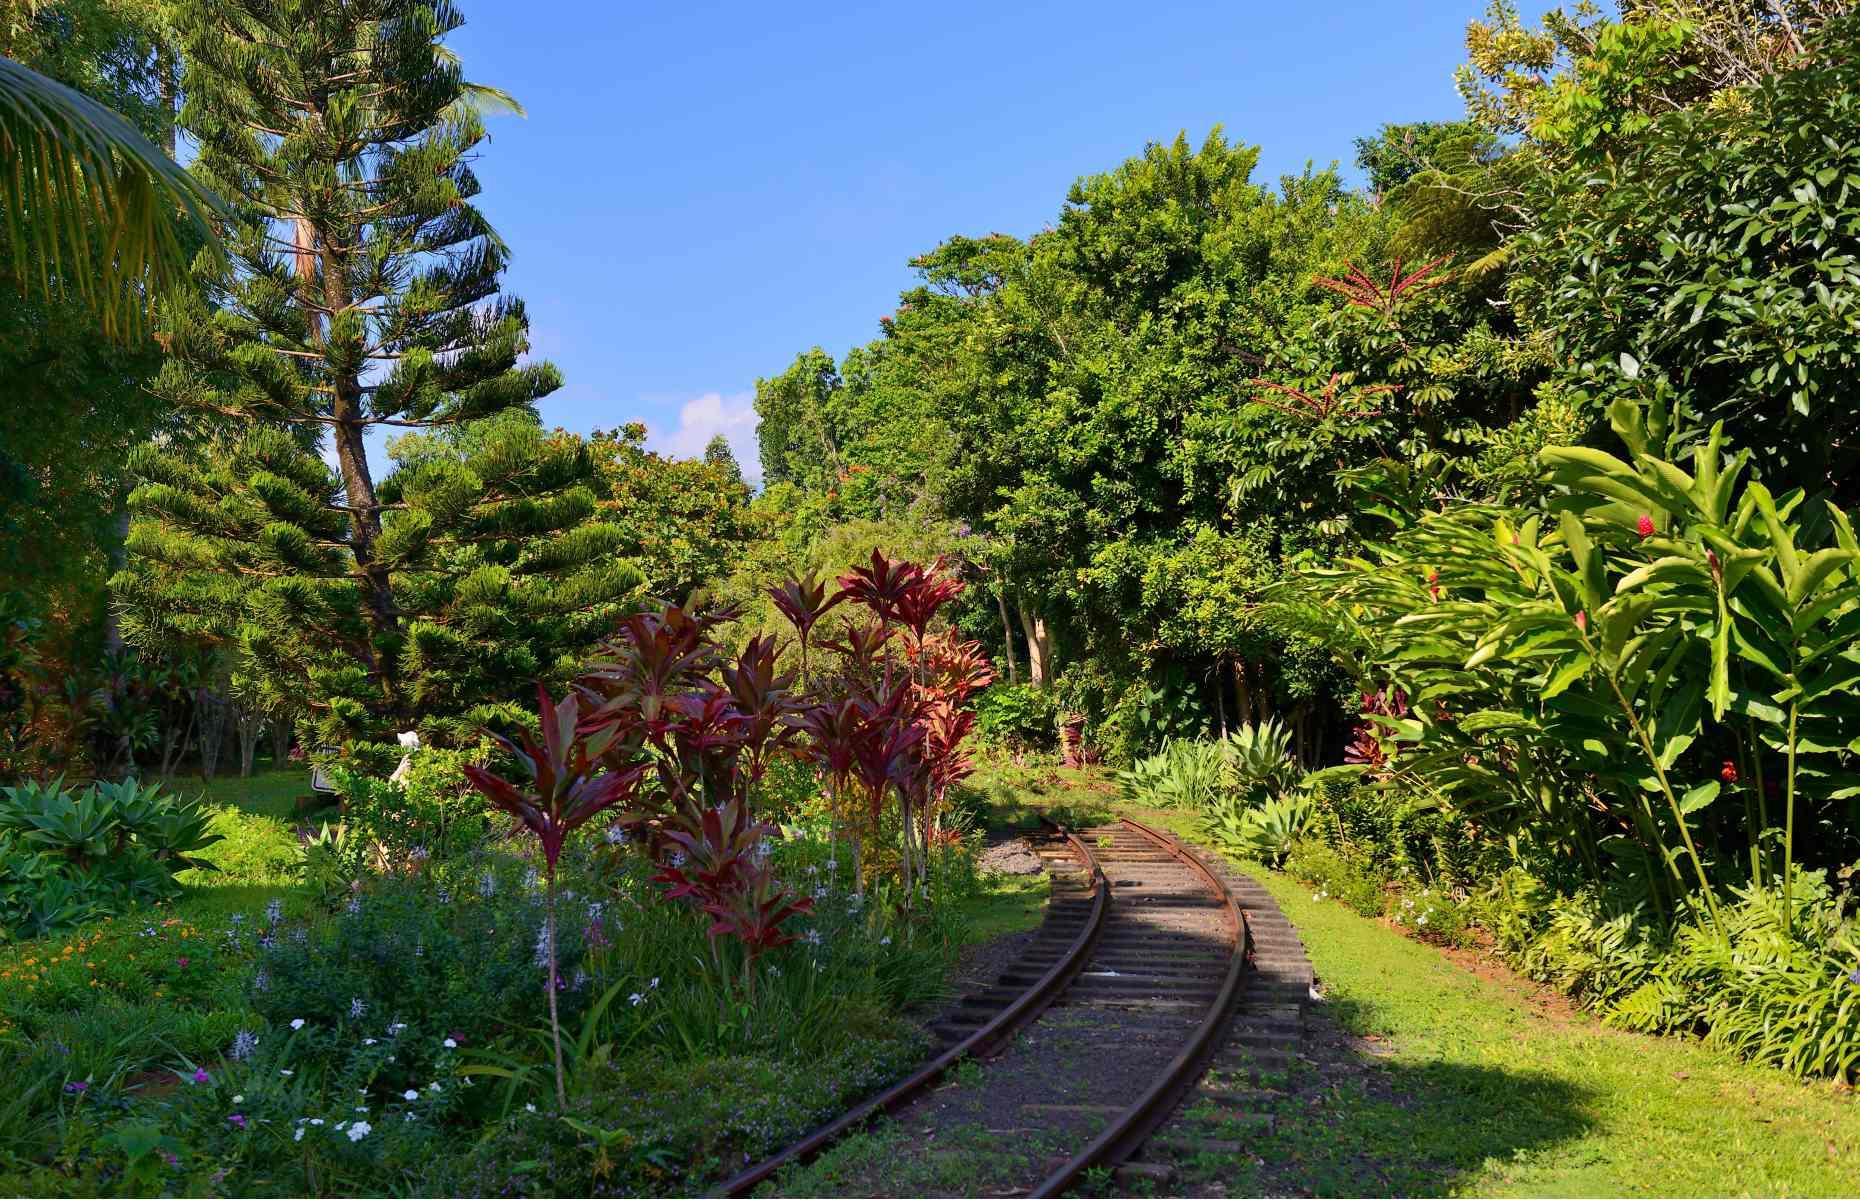 <p>On Hawaii’s oldest island, you can learn about the original sugar cane and taro crops that have sustained native Hawaiians since ancient times in a really unique way. The Kauai Plantation Railway tours the 105-acre Kilohana Plantation, where more than 50 varieties of fruit trees, vegetables, flowers, and other plants grow in fragrant orchards, fields, and groves.</p>  <p>The narrated 40-minute journey aboard mahogany-hewn carriages also features a stop to feed the working farm’s animal residents, including pigs, goats, and donkeys.</p>